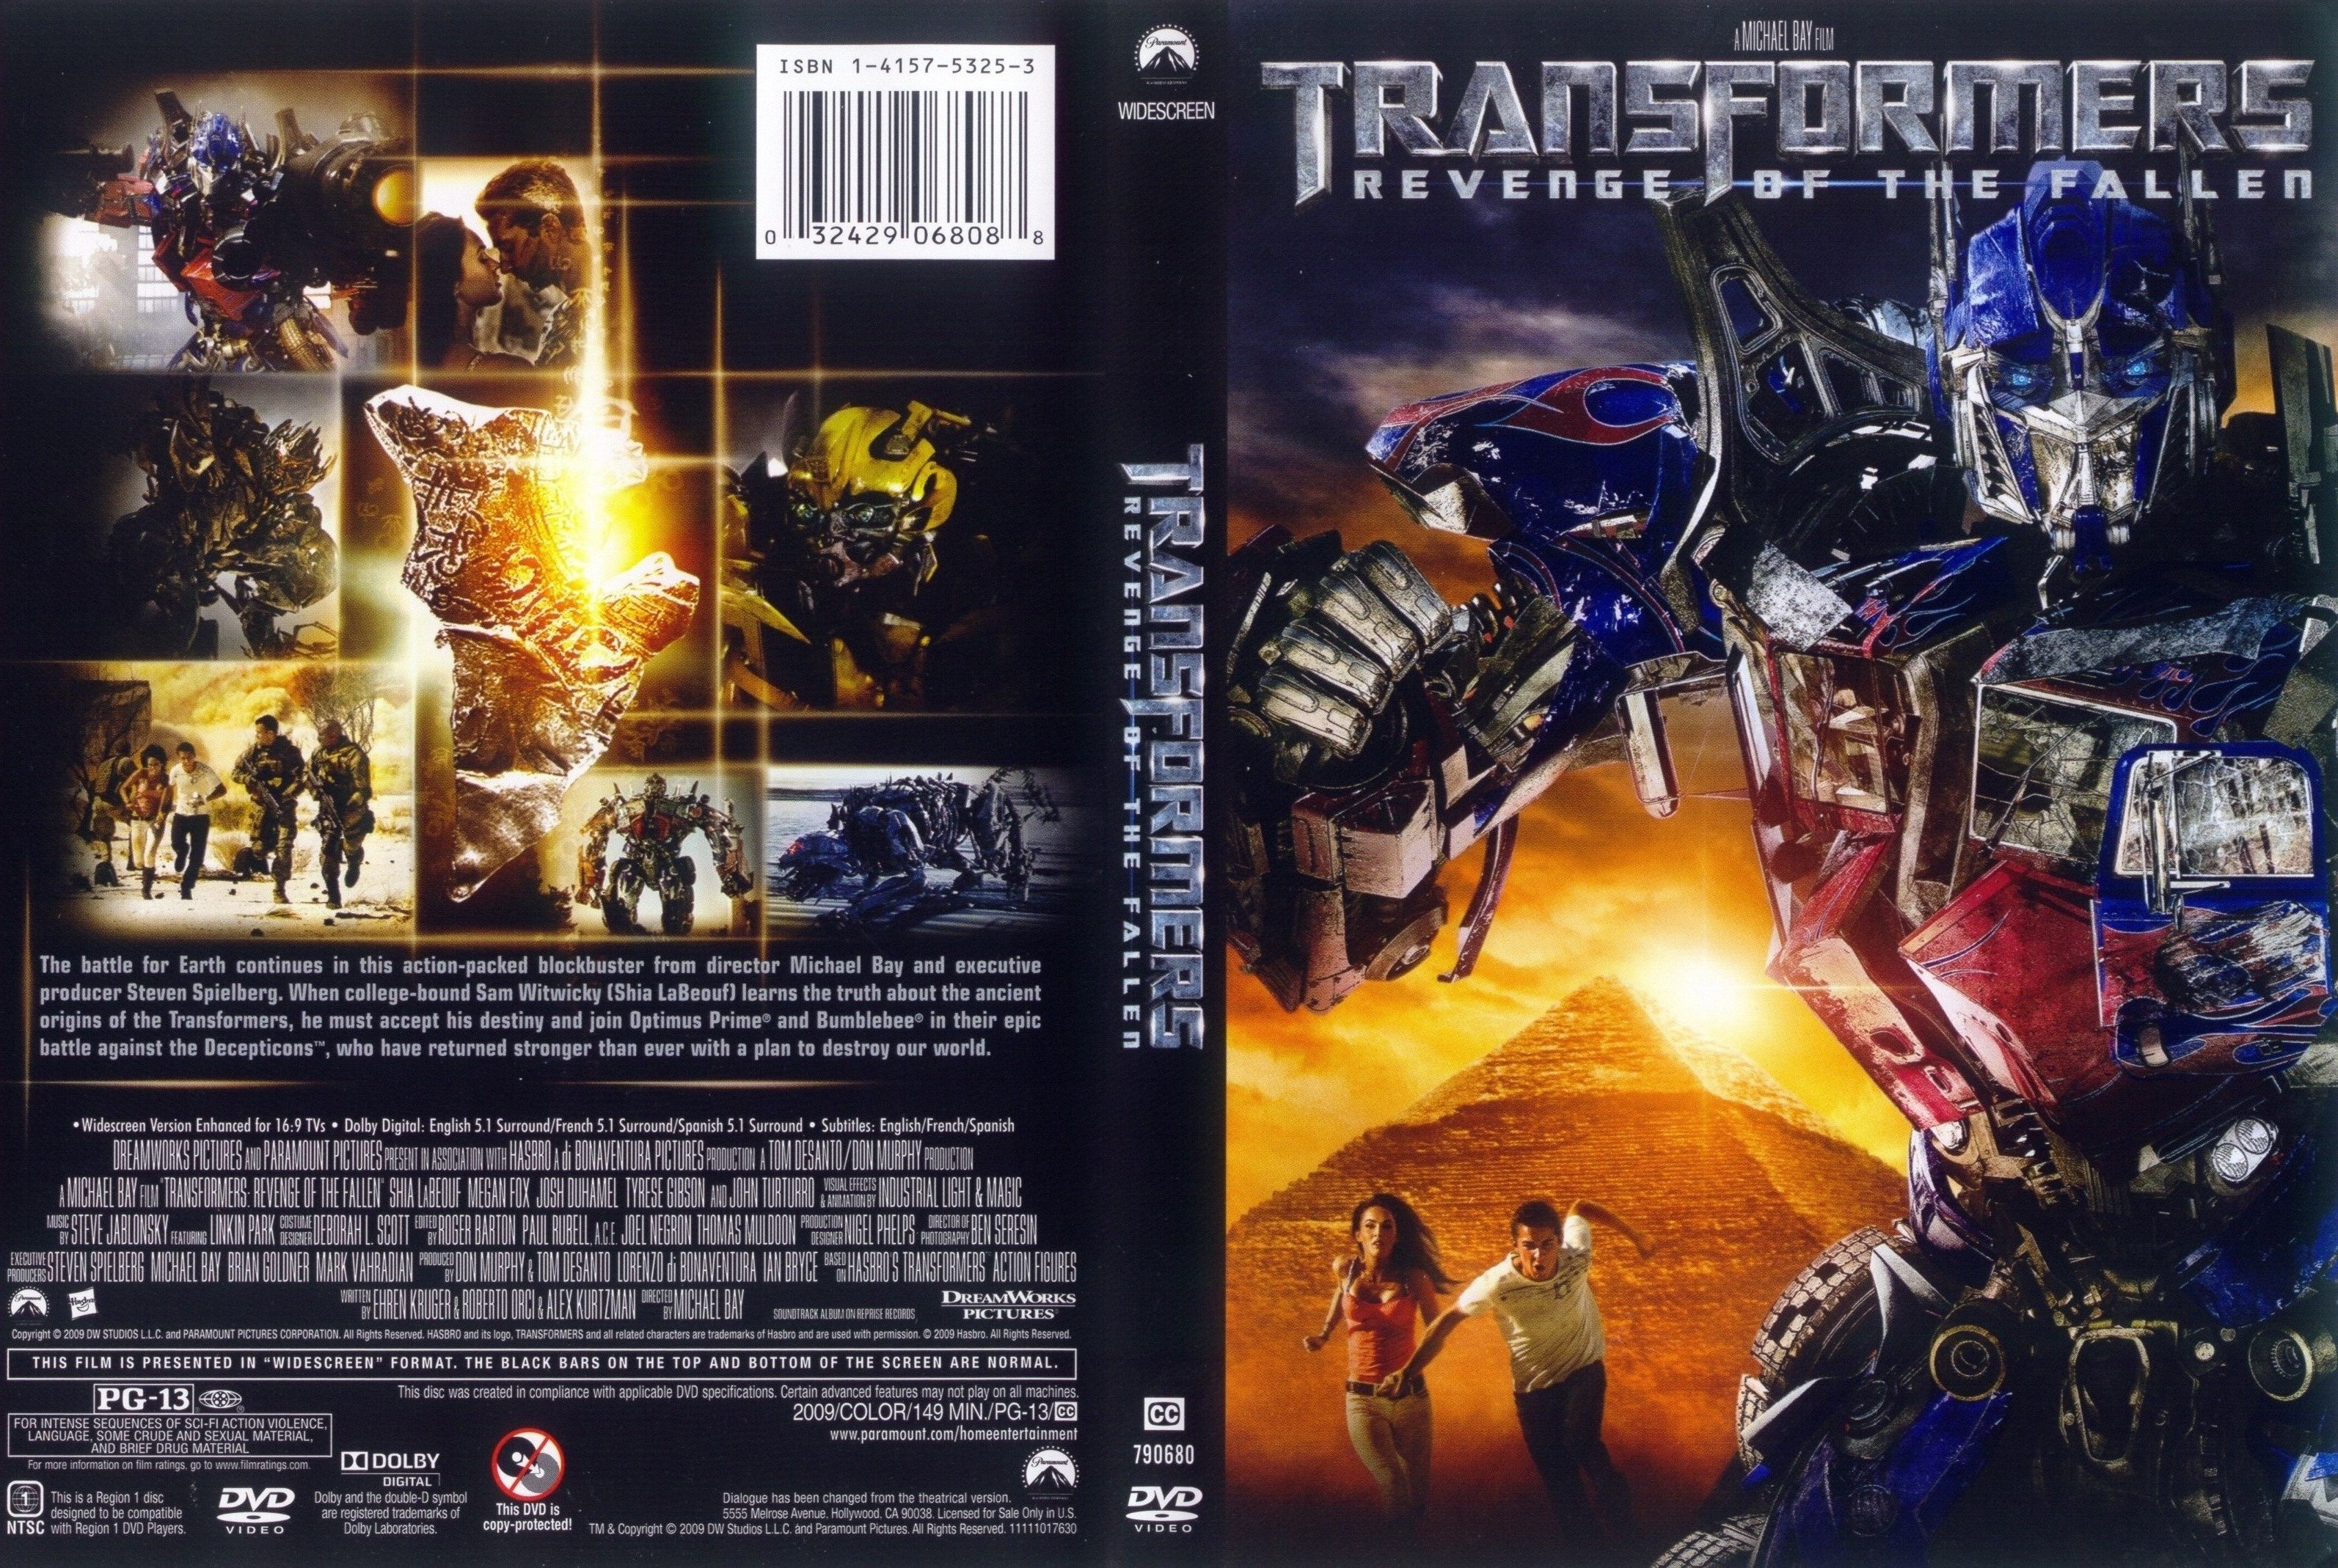 Jaquette DVD Transformers 2 (Canadienne)